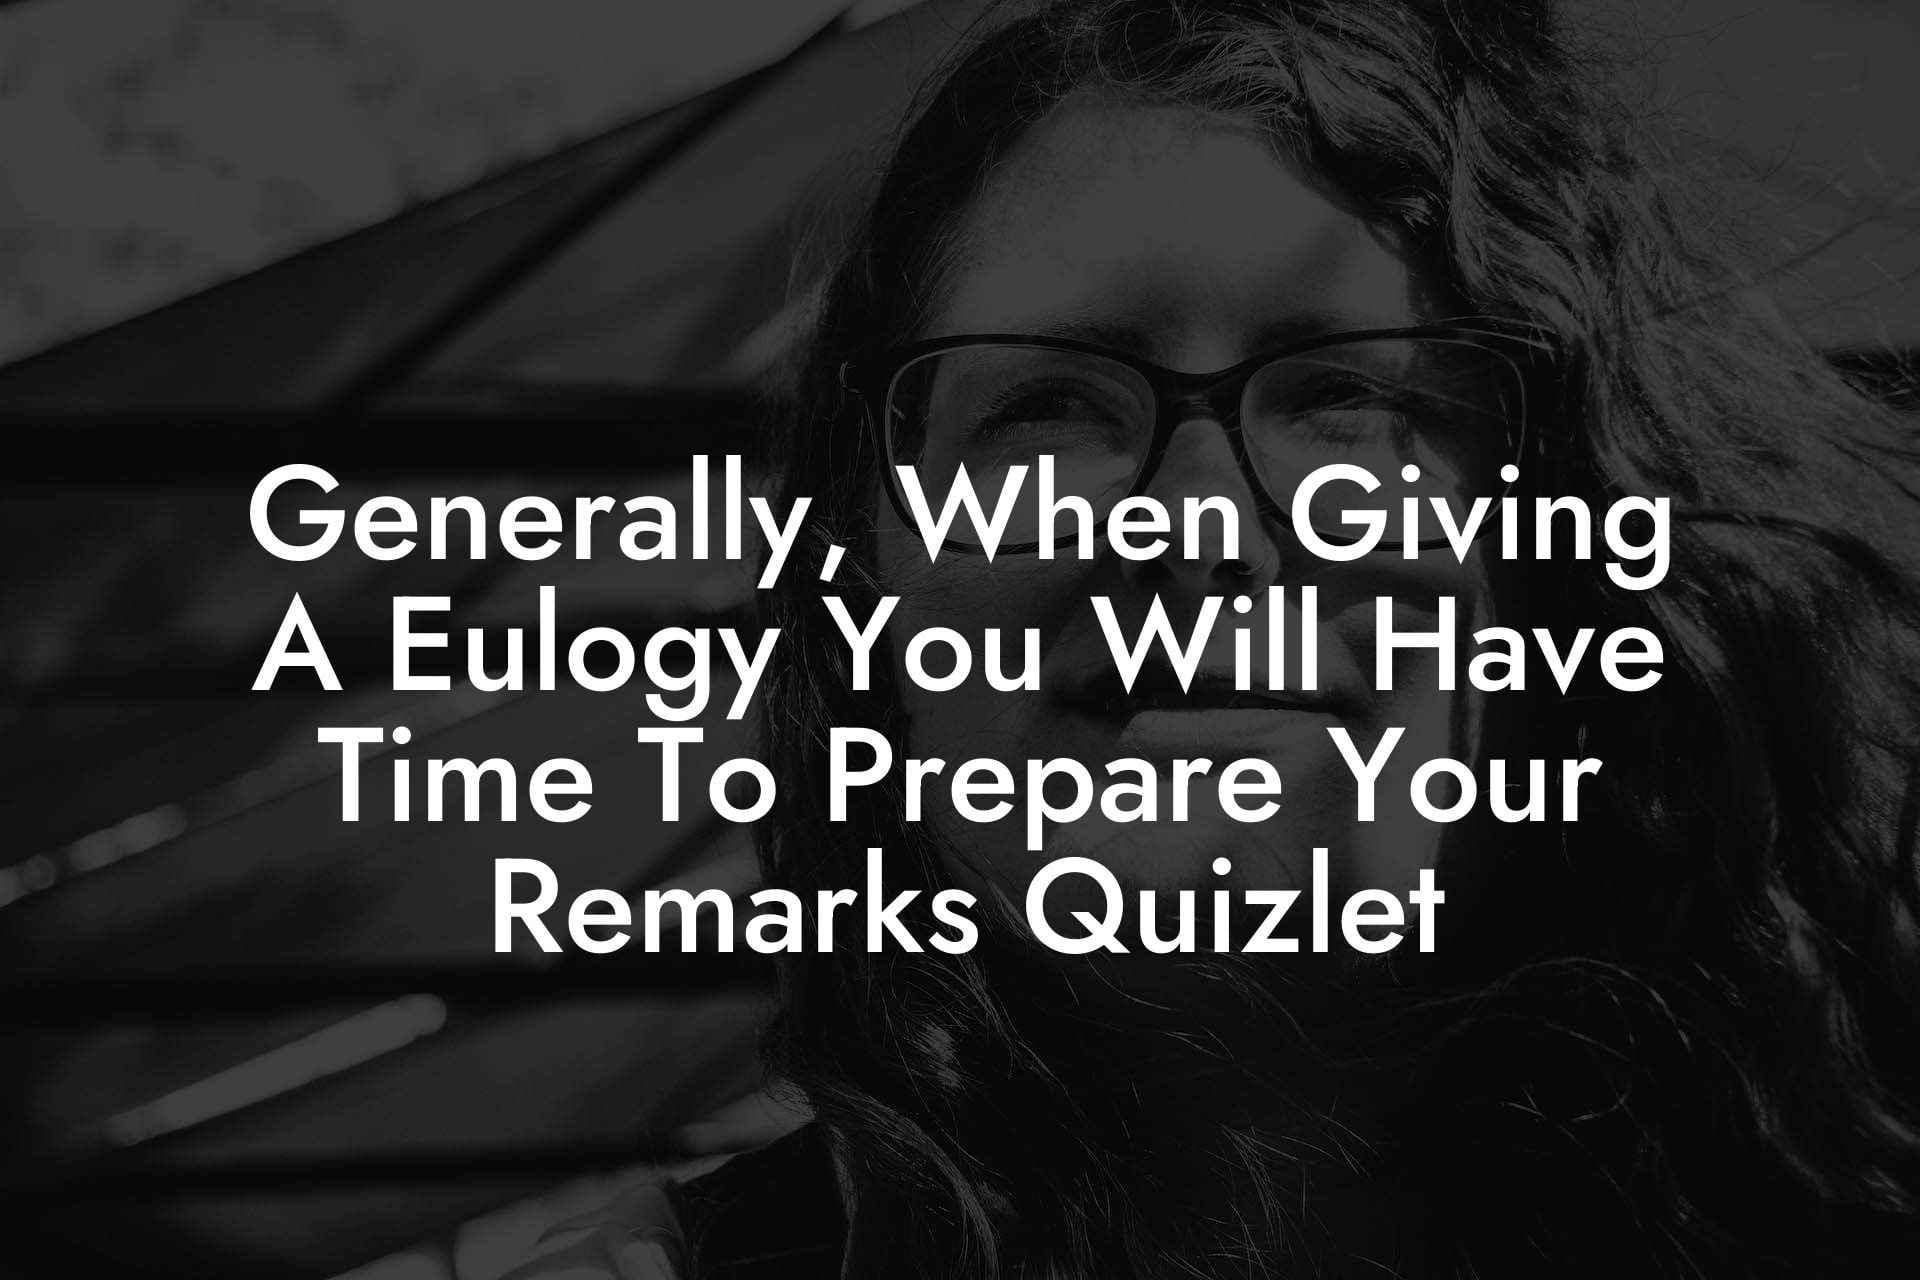 Generally, When Giving A Eulogy You Will Have Time To Prepare Your Remarks Quizlet